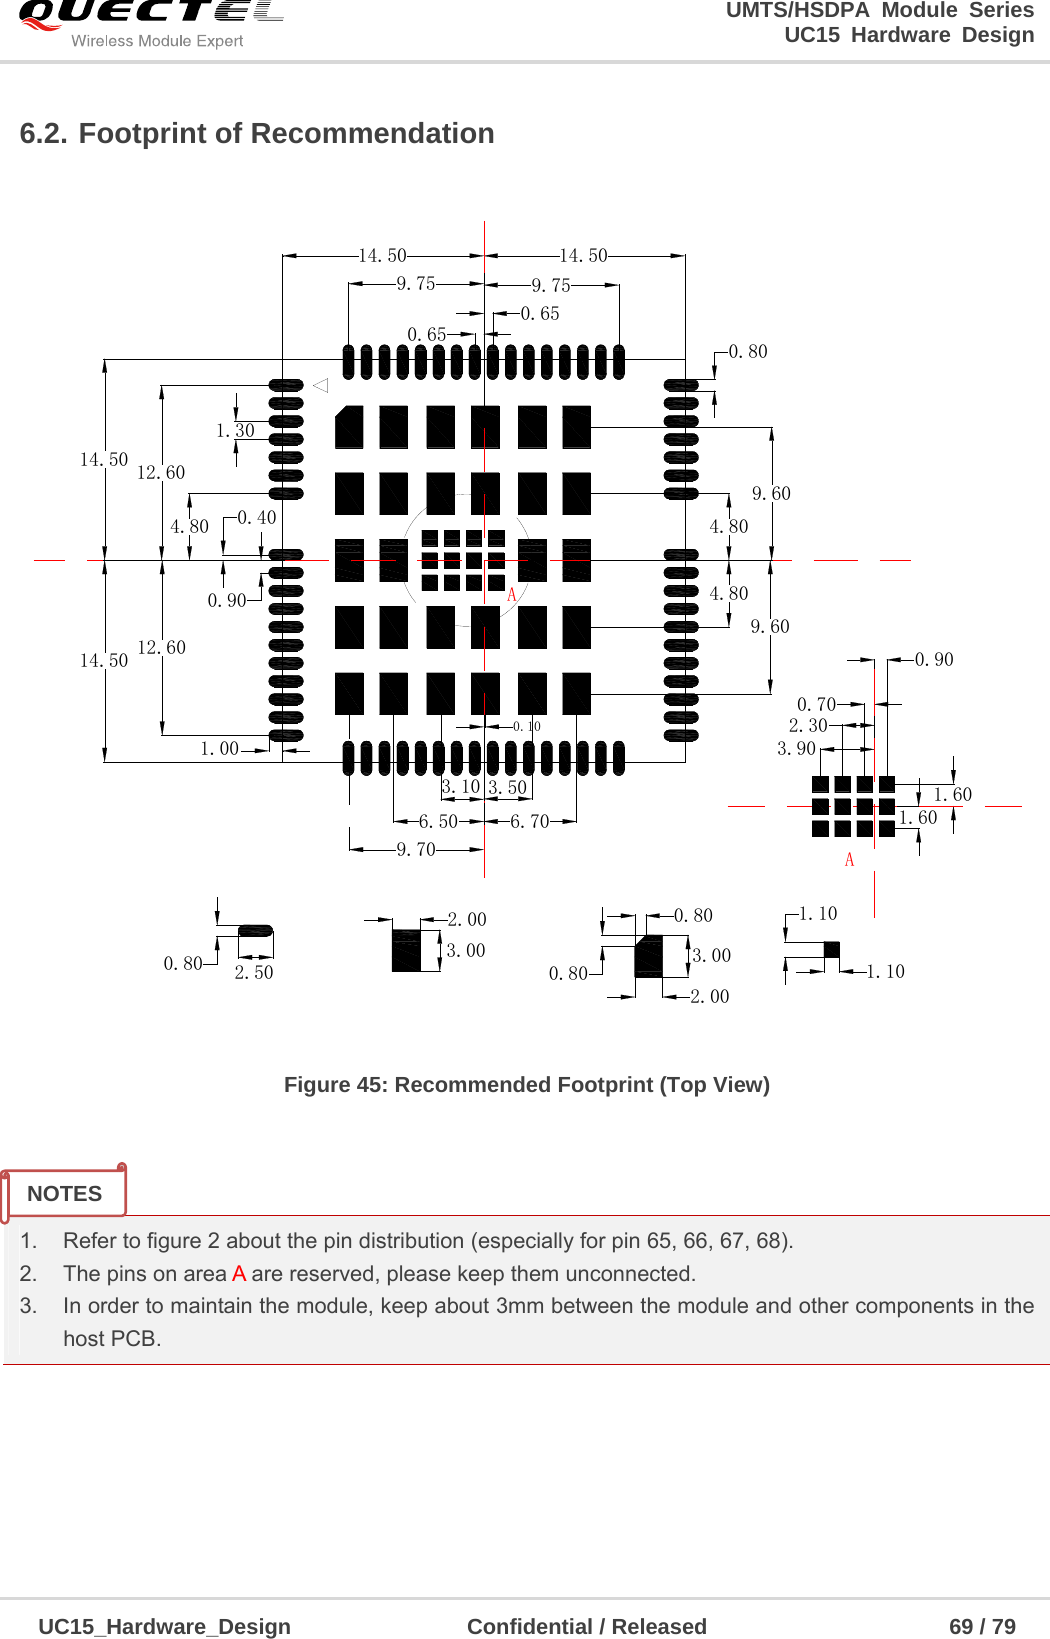                                                                        UMTS/HSDPA Module Series                                                                 UC15 Hardware Design  UC15_Hardware_Design                Confidential / Released                      69 / 79    6.2. Footprint of Recommendation AA Figure 45: Recommended Footprint (Top View)    1.    Refer to figure 2 about the pin distribution (especially for pin 65, 66, 67, 68). 2.    The pins on area A are reserved, please keep them unconnected. 3.    In order to maintain the module, keep about 3mm between the module and other components in the  host PCB.     NOTES 